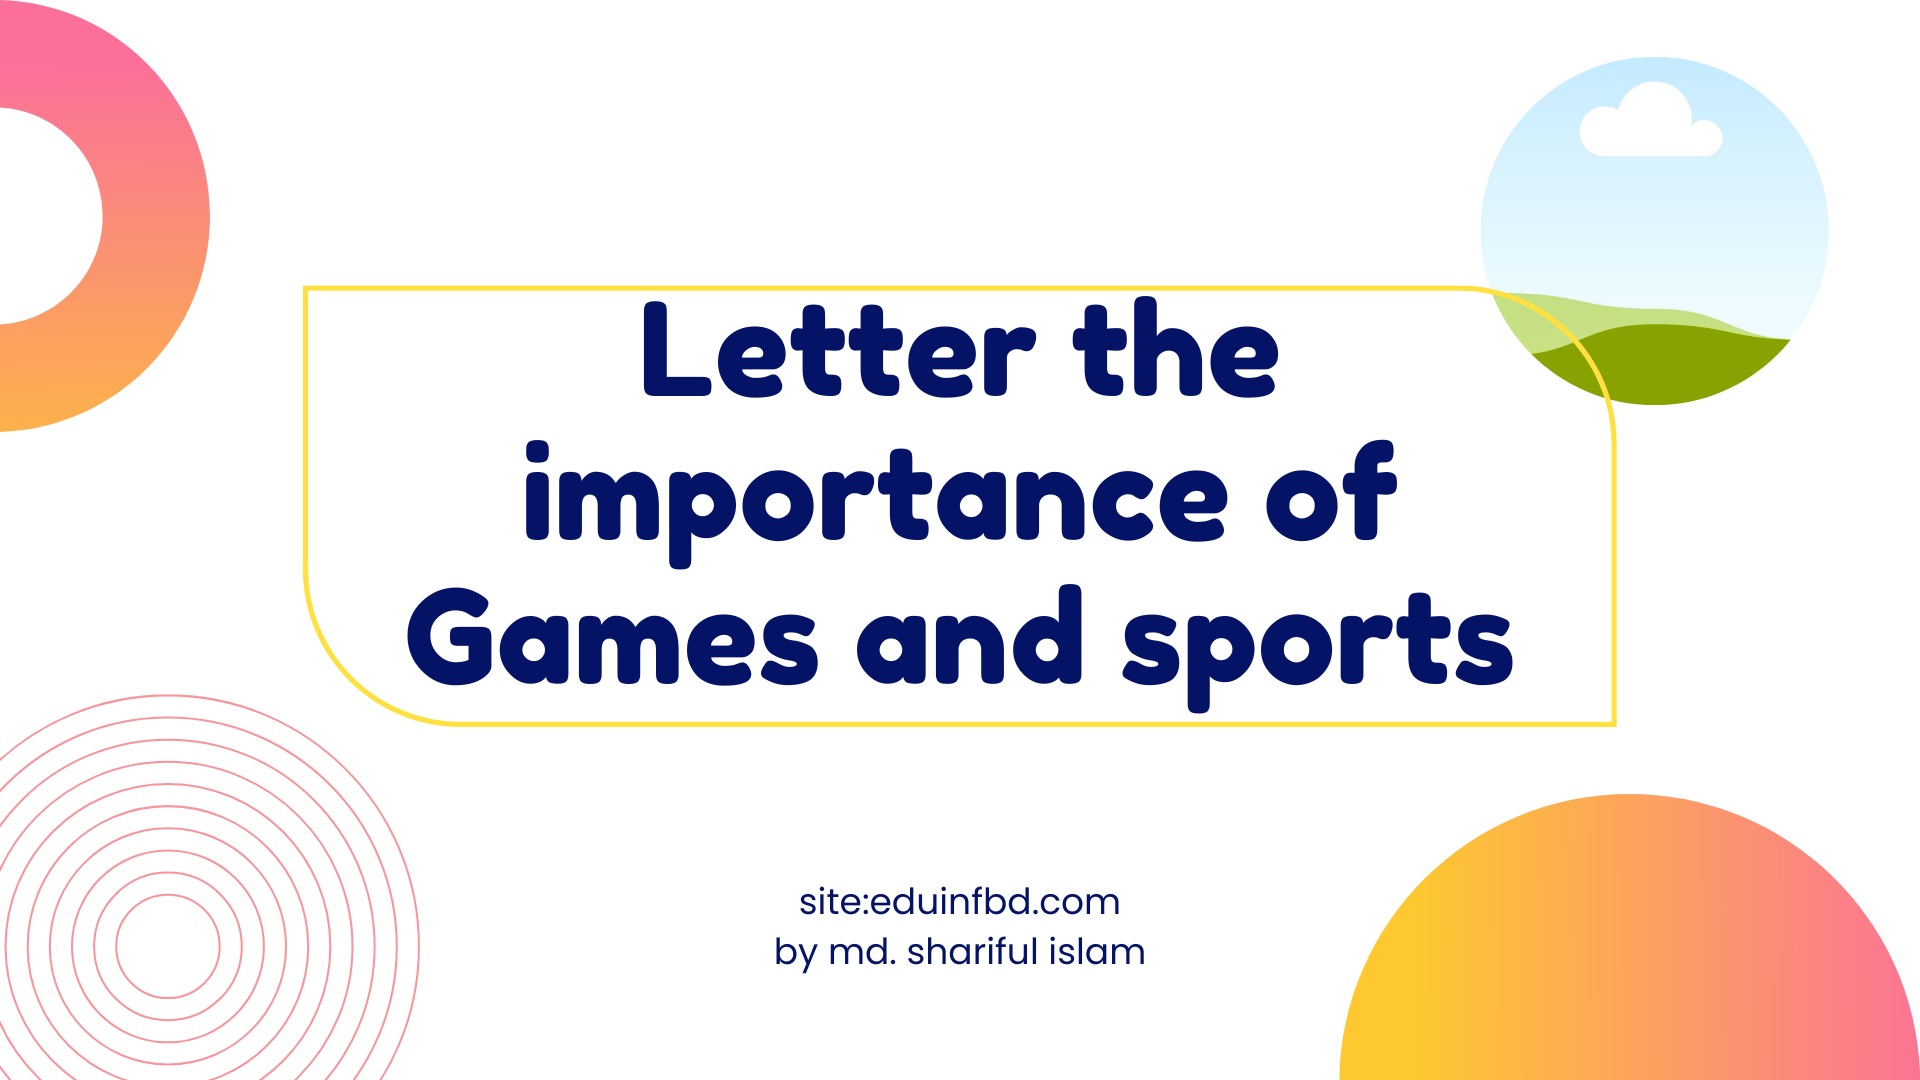 Letter the importance of Games and sports